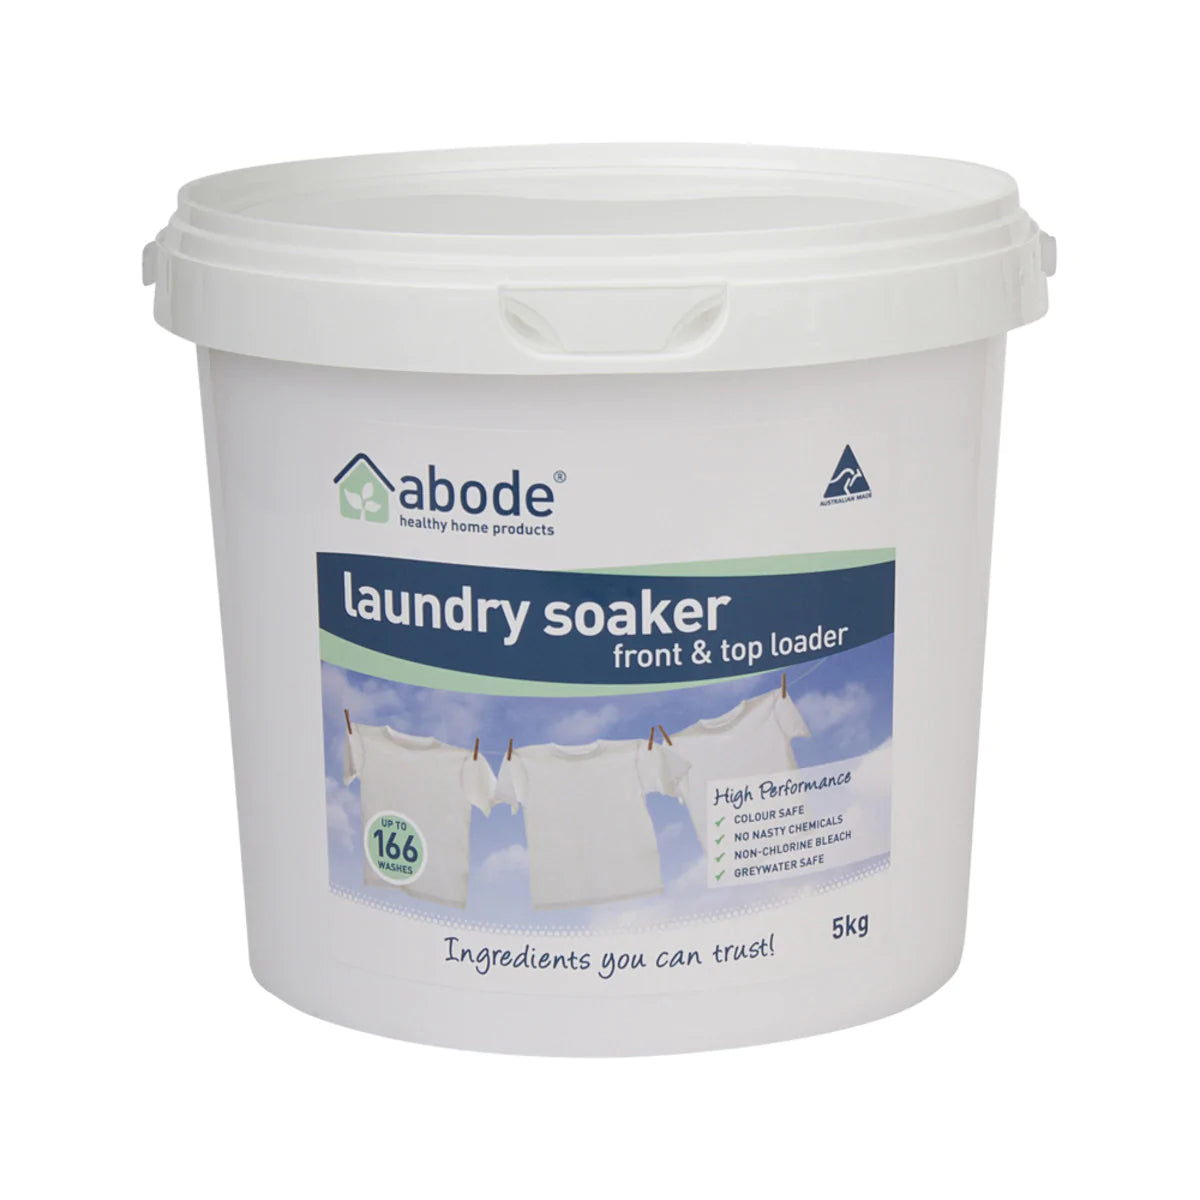 Abode Laundry Soaker High Performance-The Living Co.